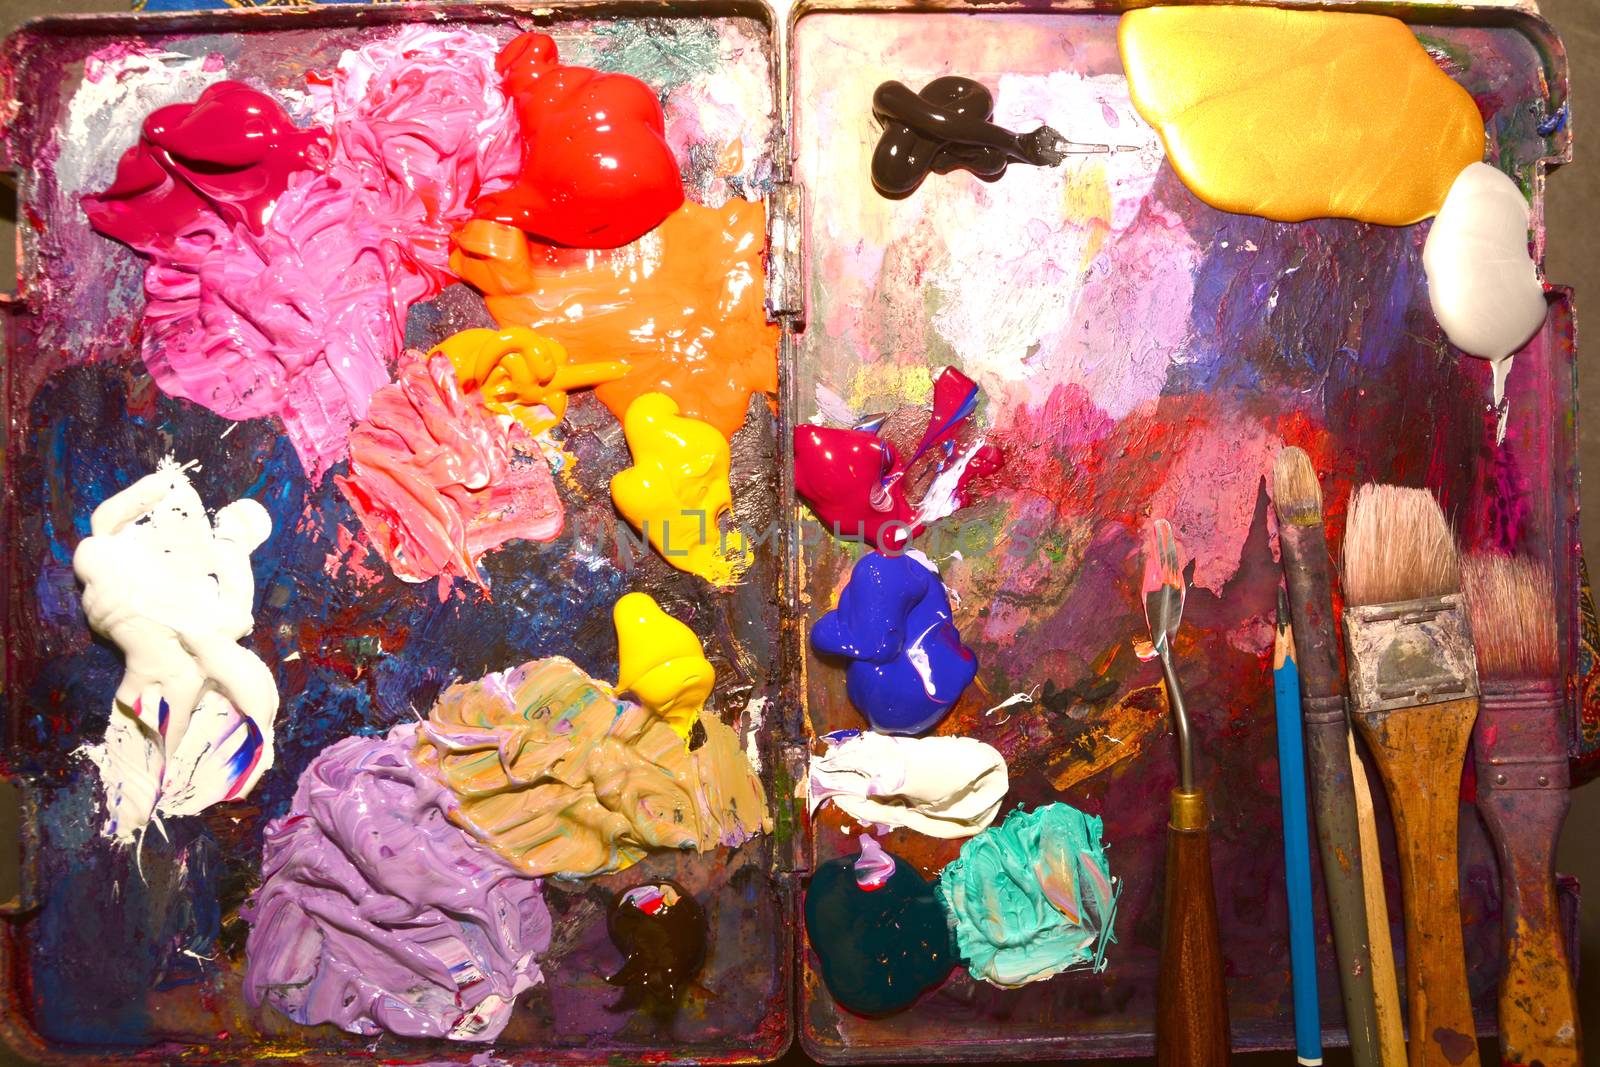 Paintbrushes and Palette-knife on the palette for mixing oil paints